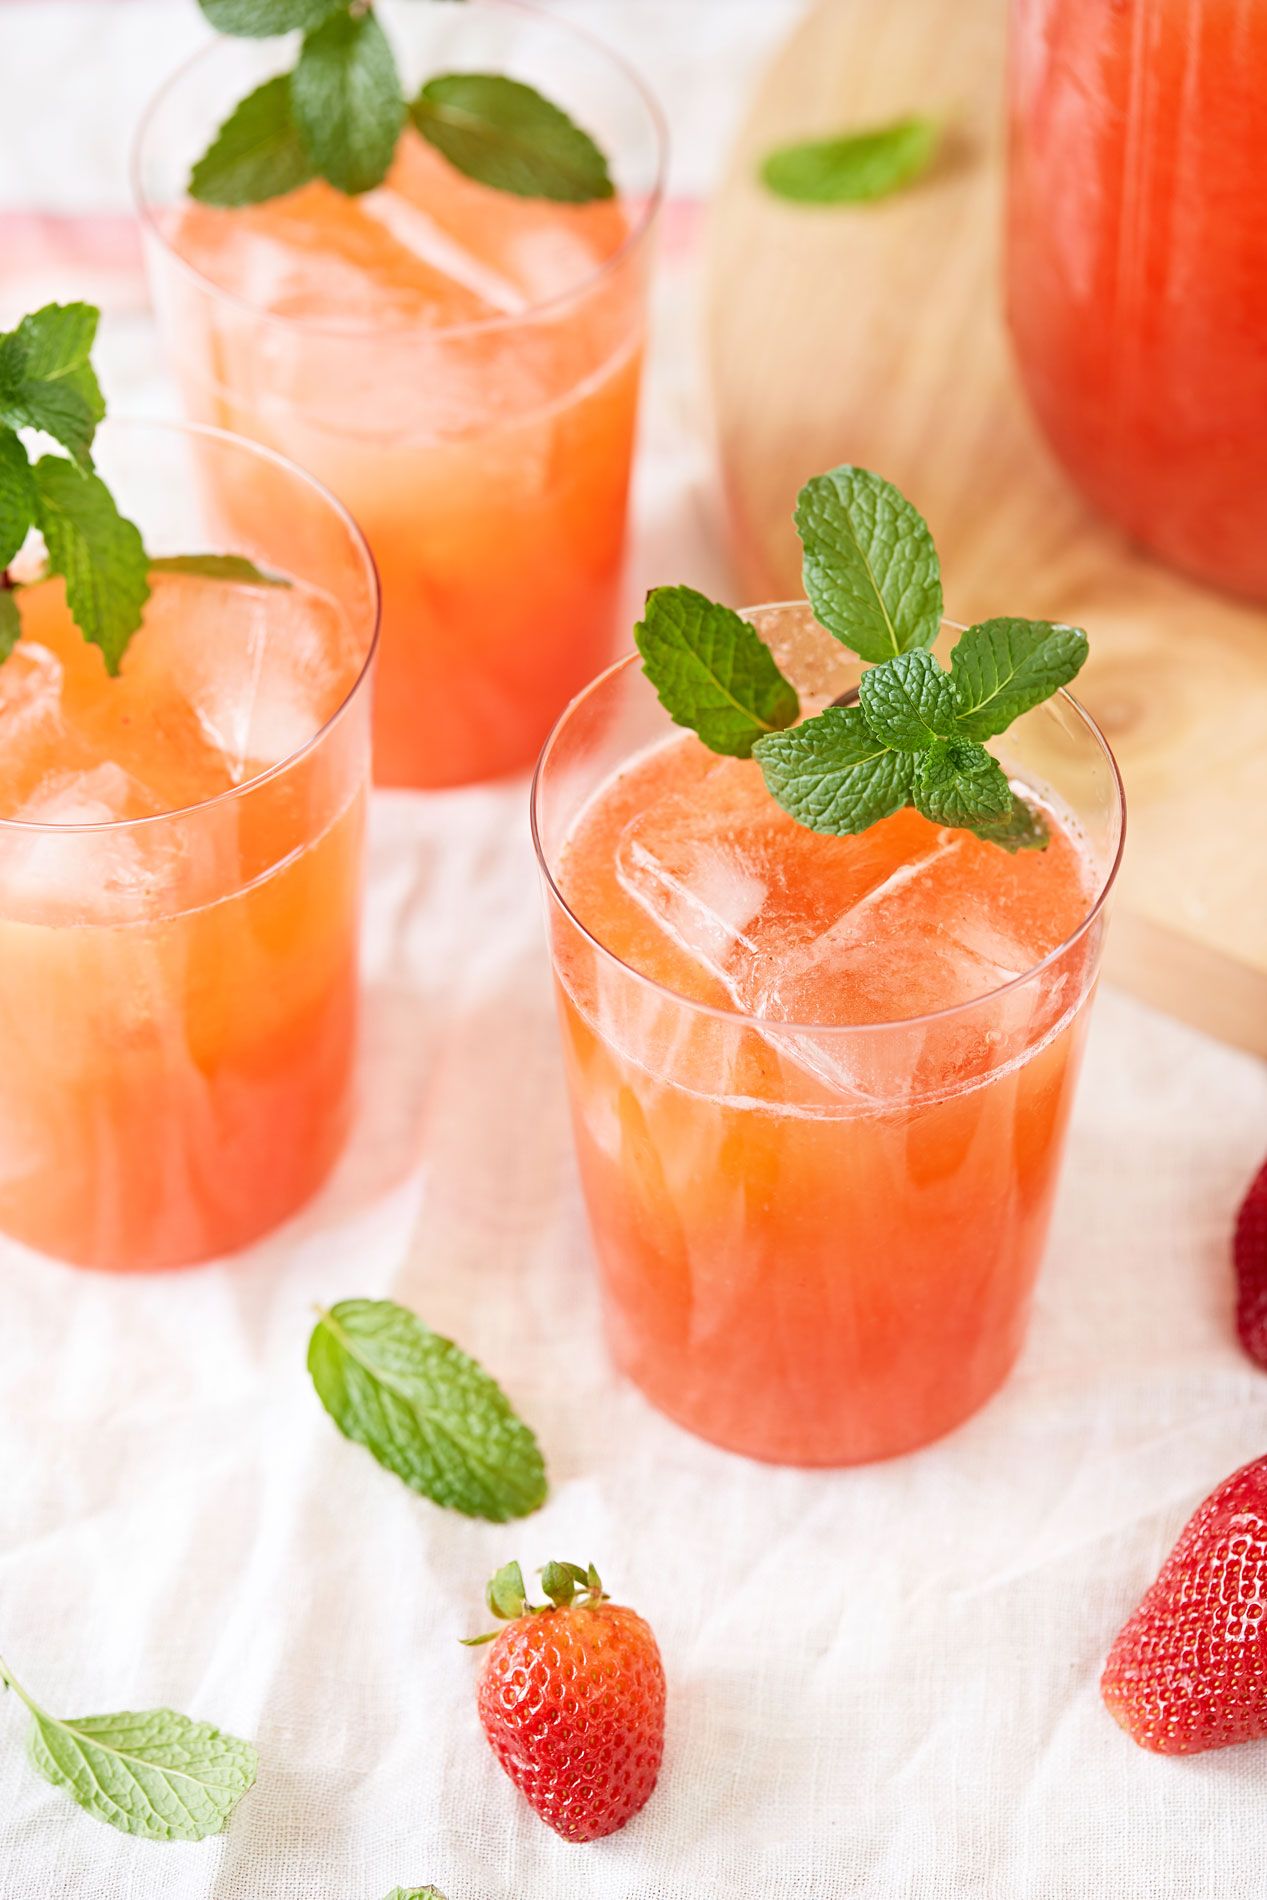 forlade Natura Macadam 33 Easy Non-Alcoholic Party Drinks - Recipes For Summer Mocktails